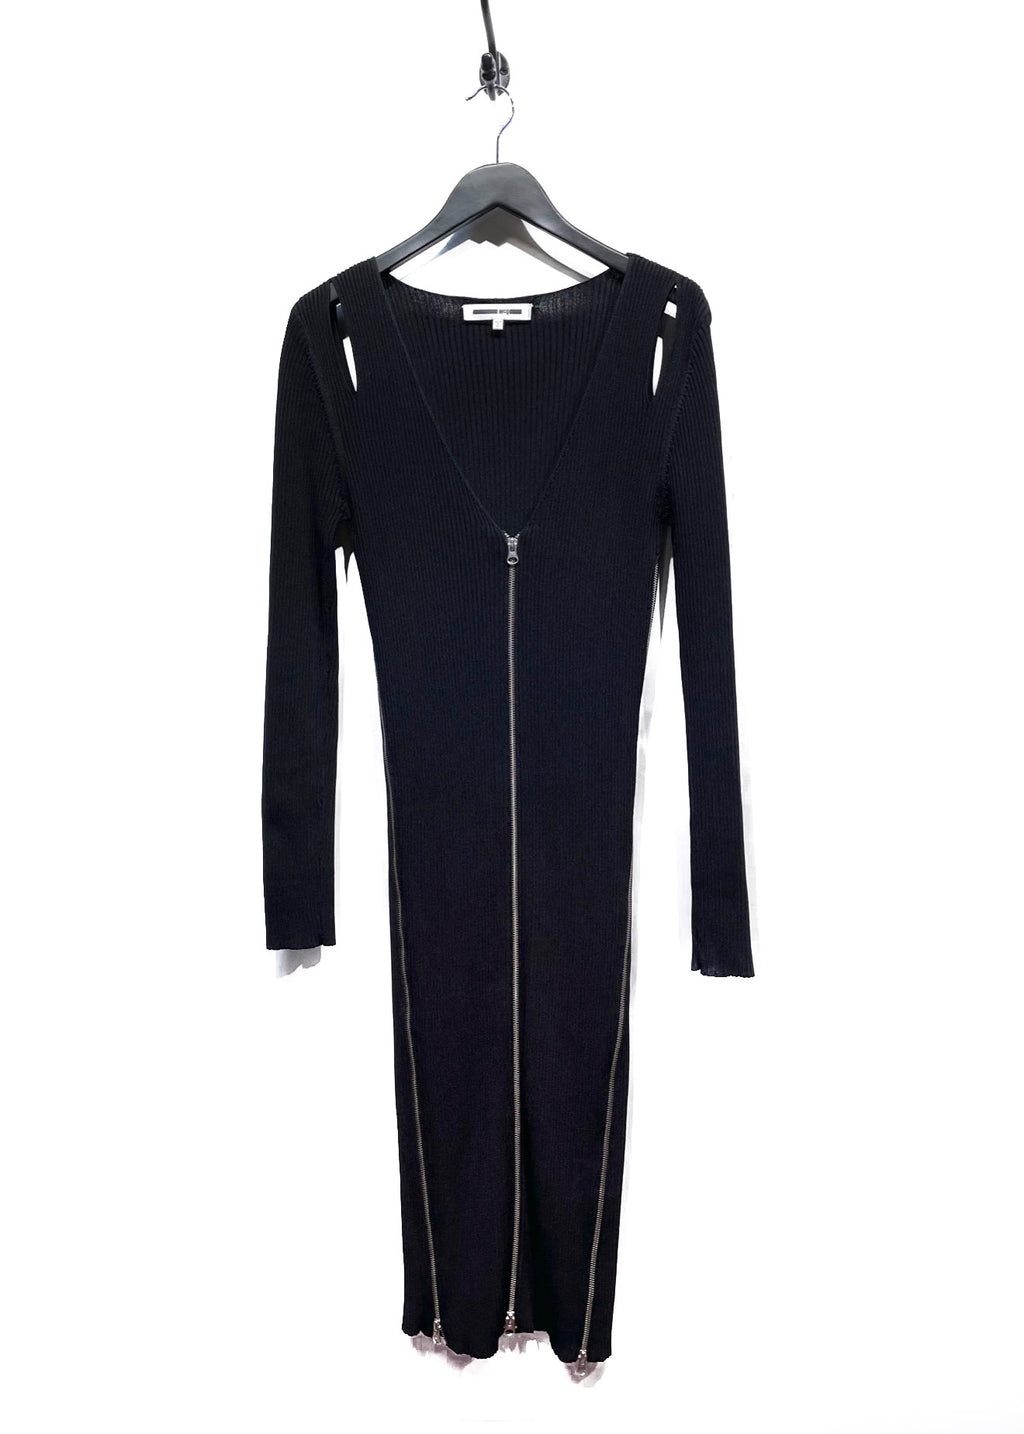 Mcq Black Ribbed Cut Out Zippered Long Bodycon Dress